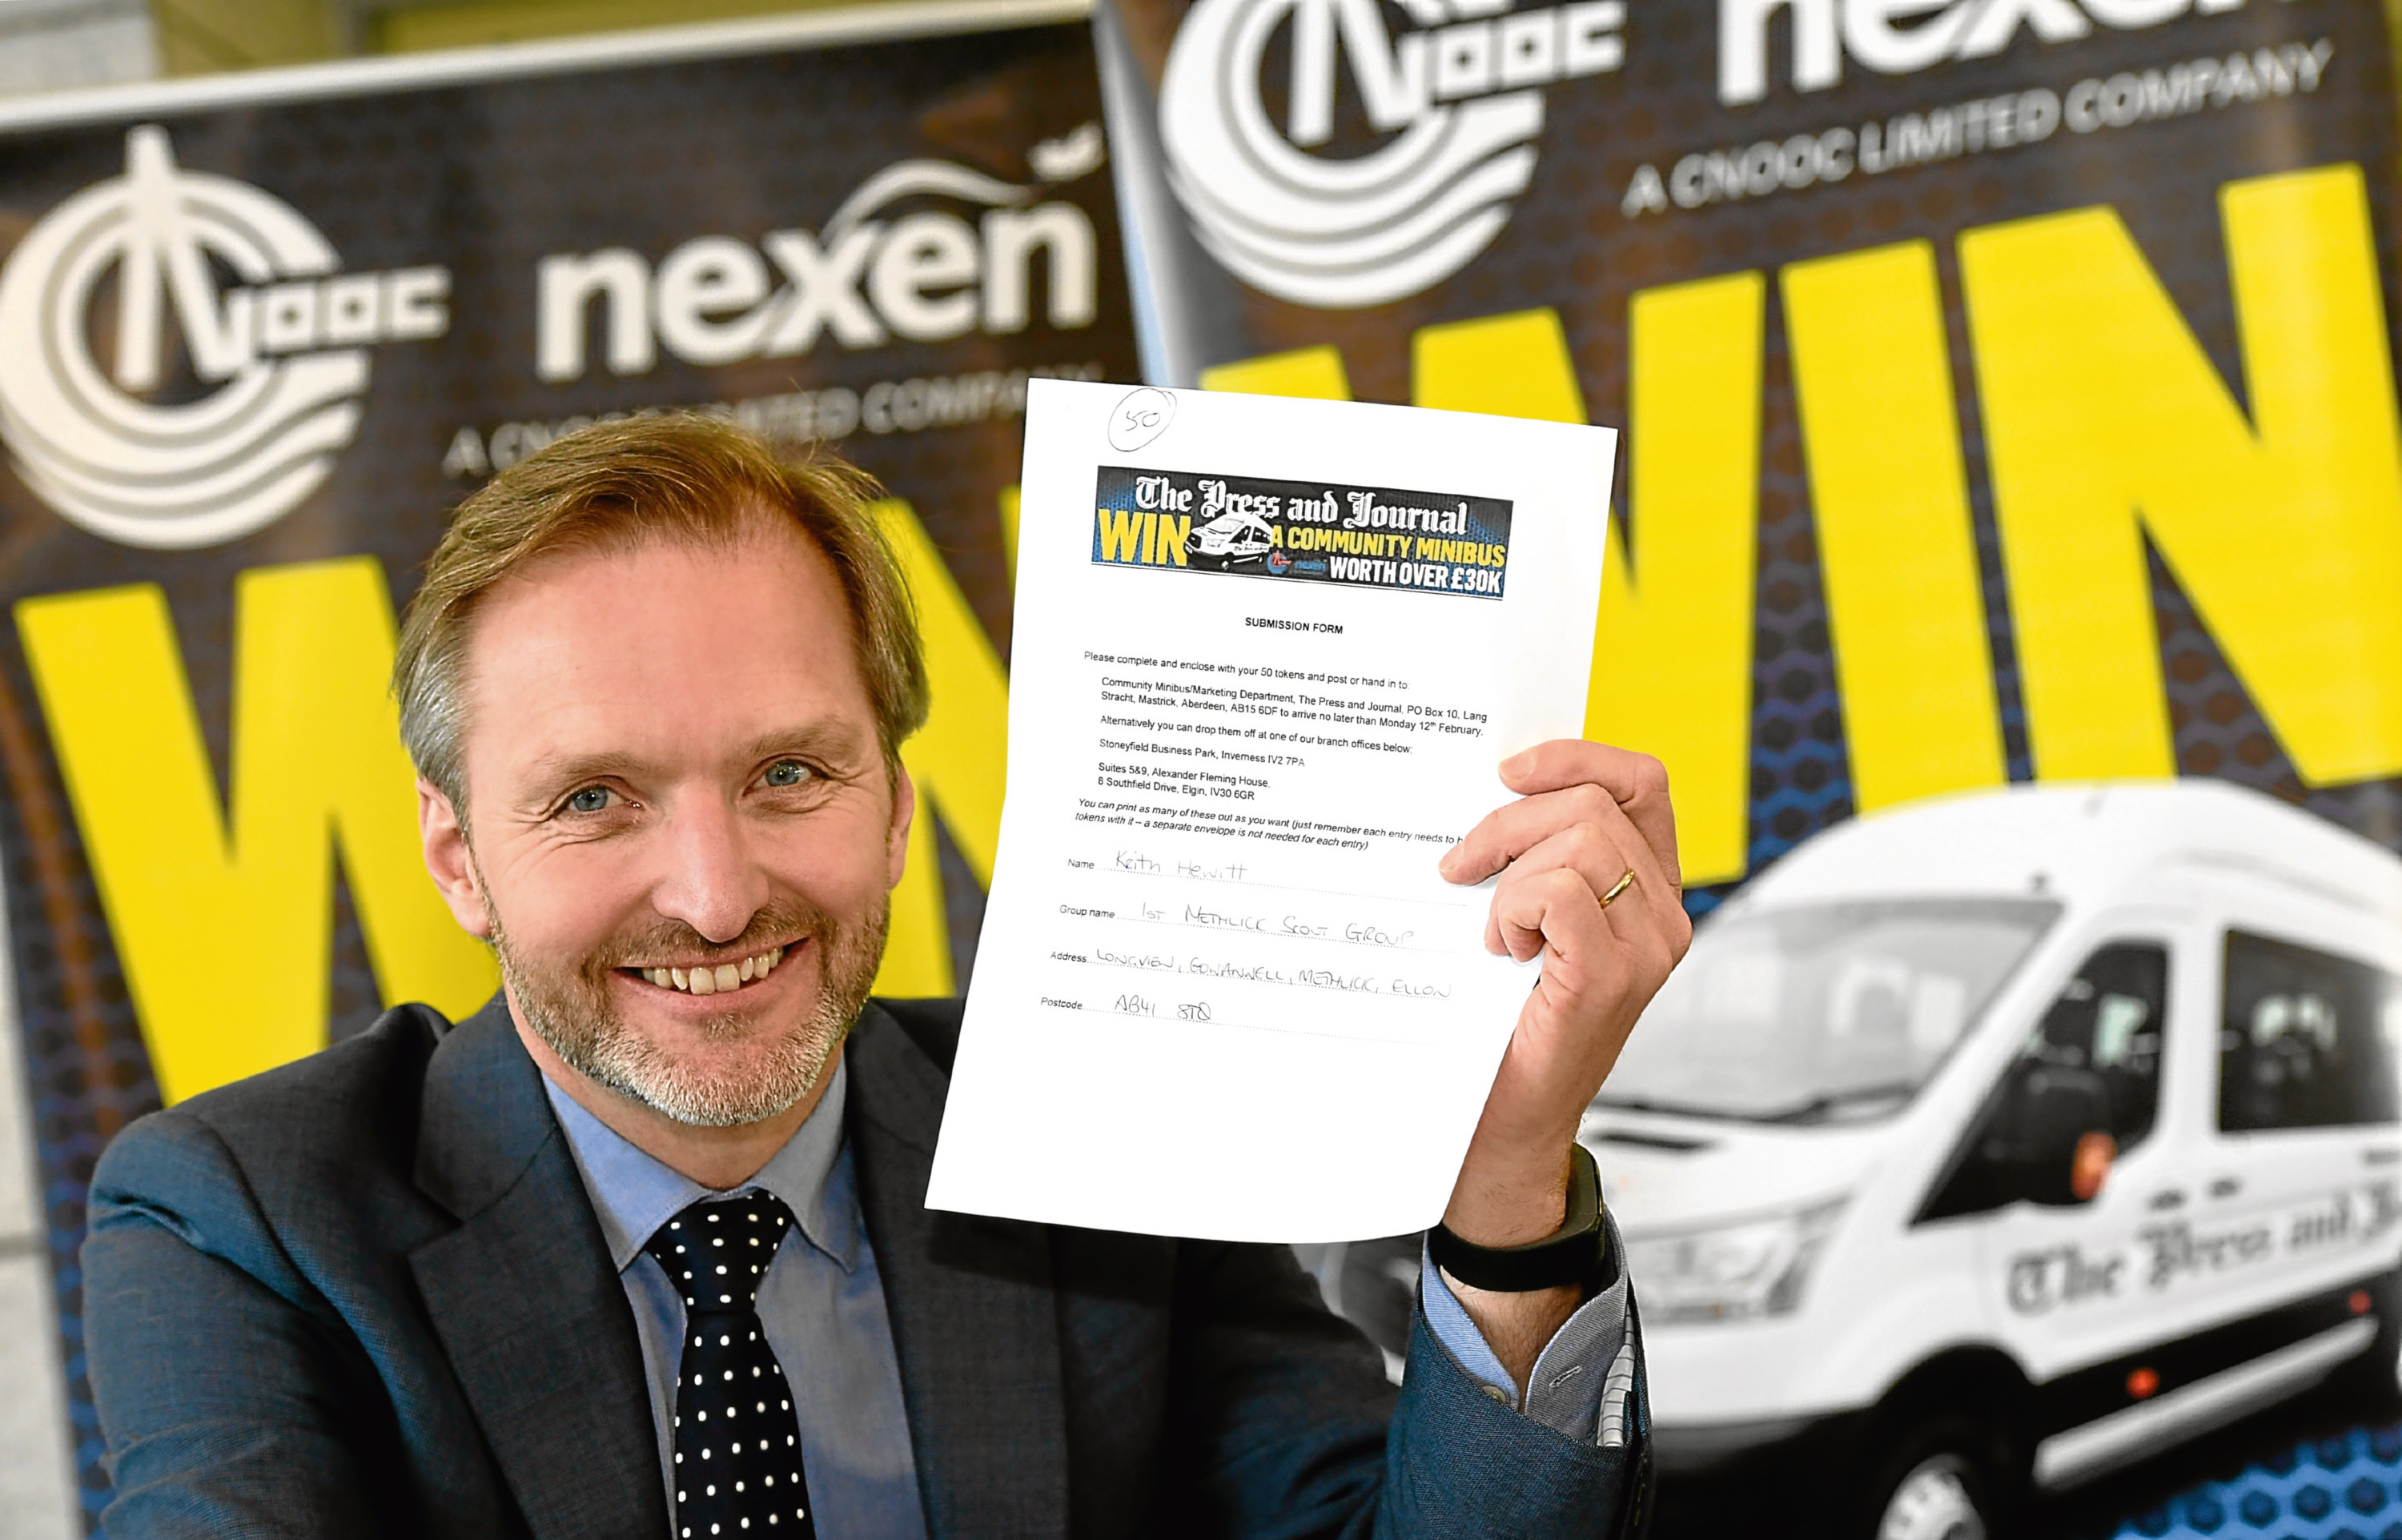 ****NOTE - CONTACT DETAILS FOR THE WINNER ARE ON THE TICKET****
Press and Journal / Nexen, Community Mini Bus Competition.    
Pictured - Chair of Nexen UK CSR committee who made the draw for the winner of the mini bus, holds the winning ticket.      
Picture by Kami Thomson    22-02-18